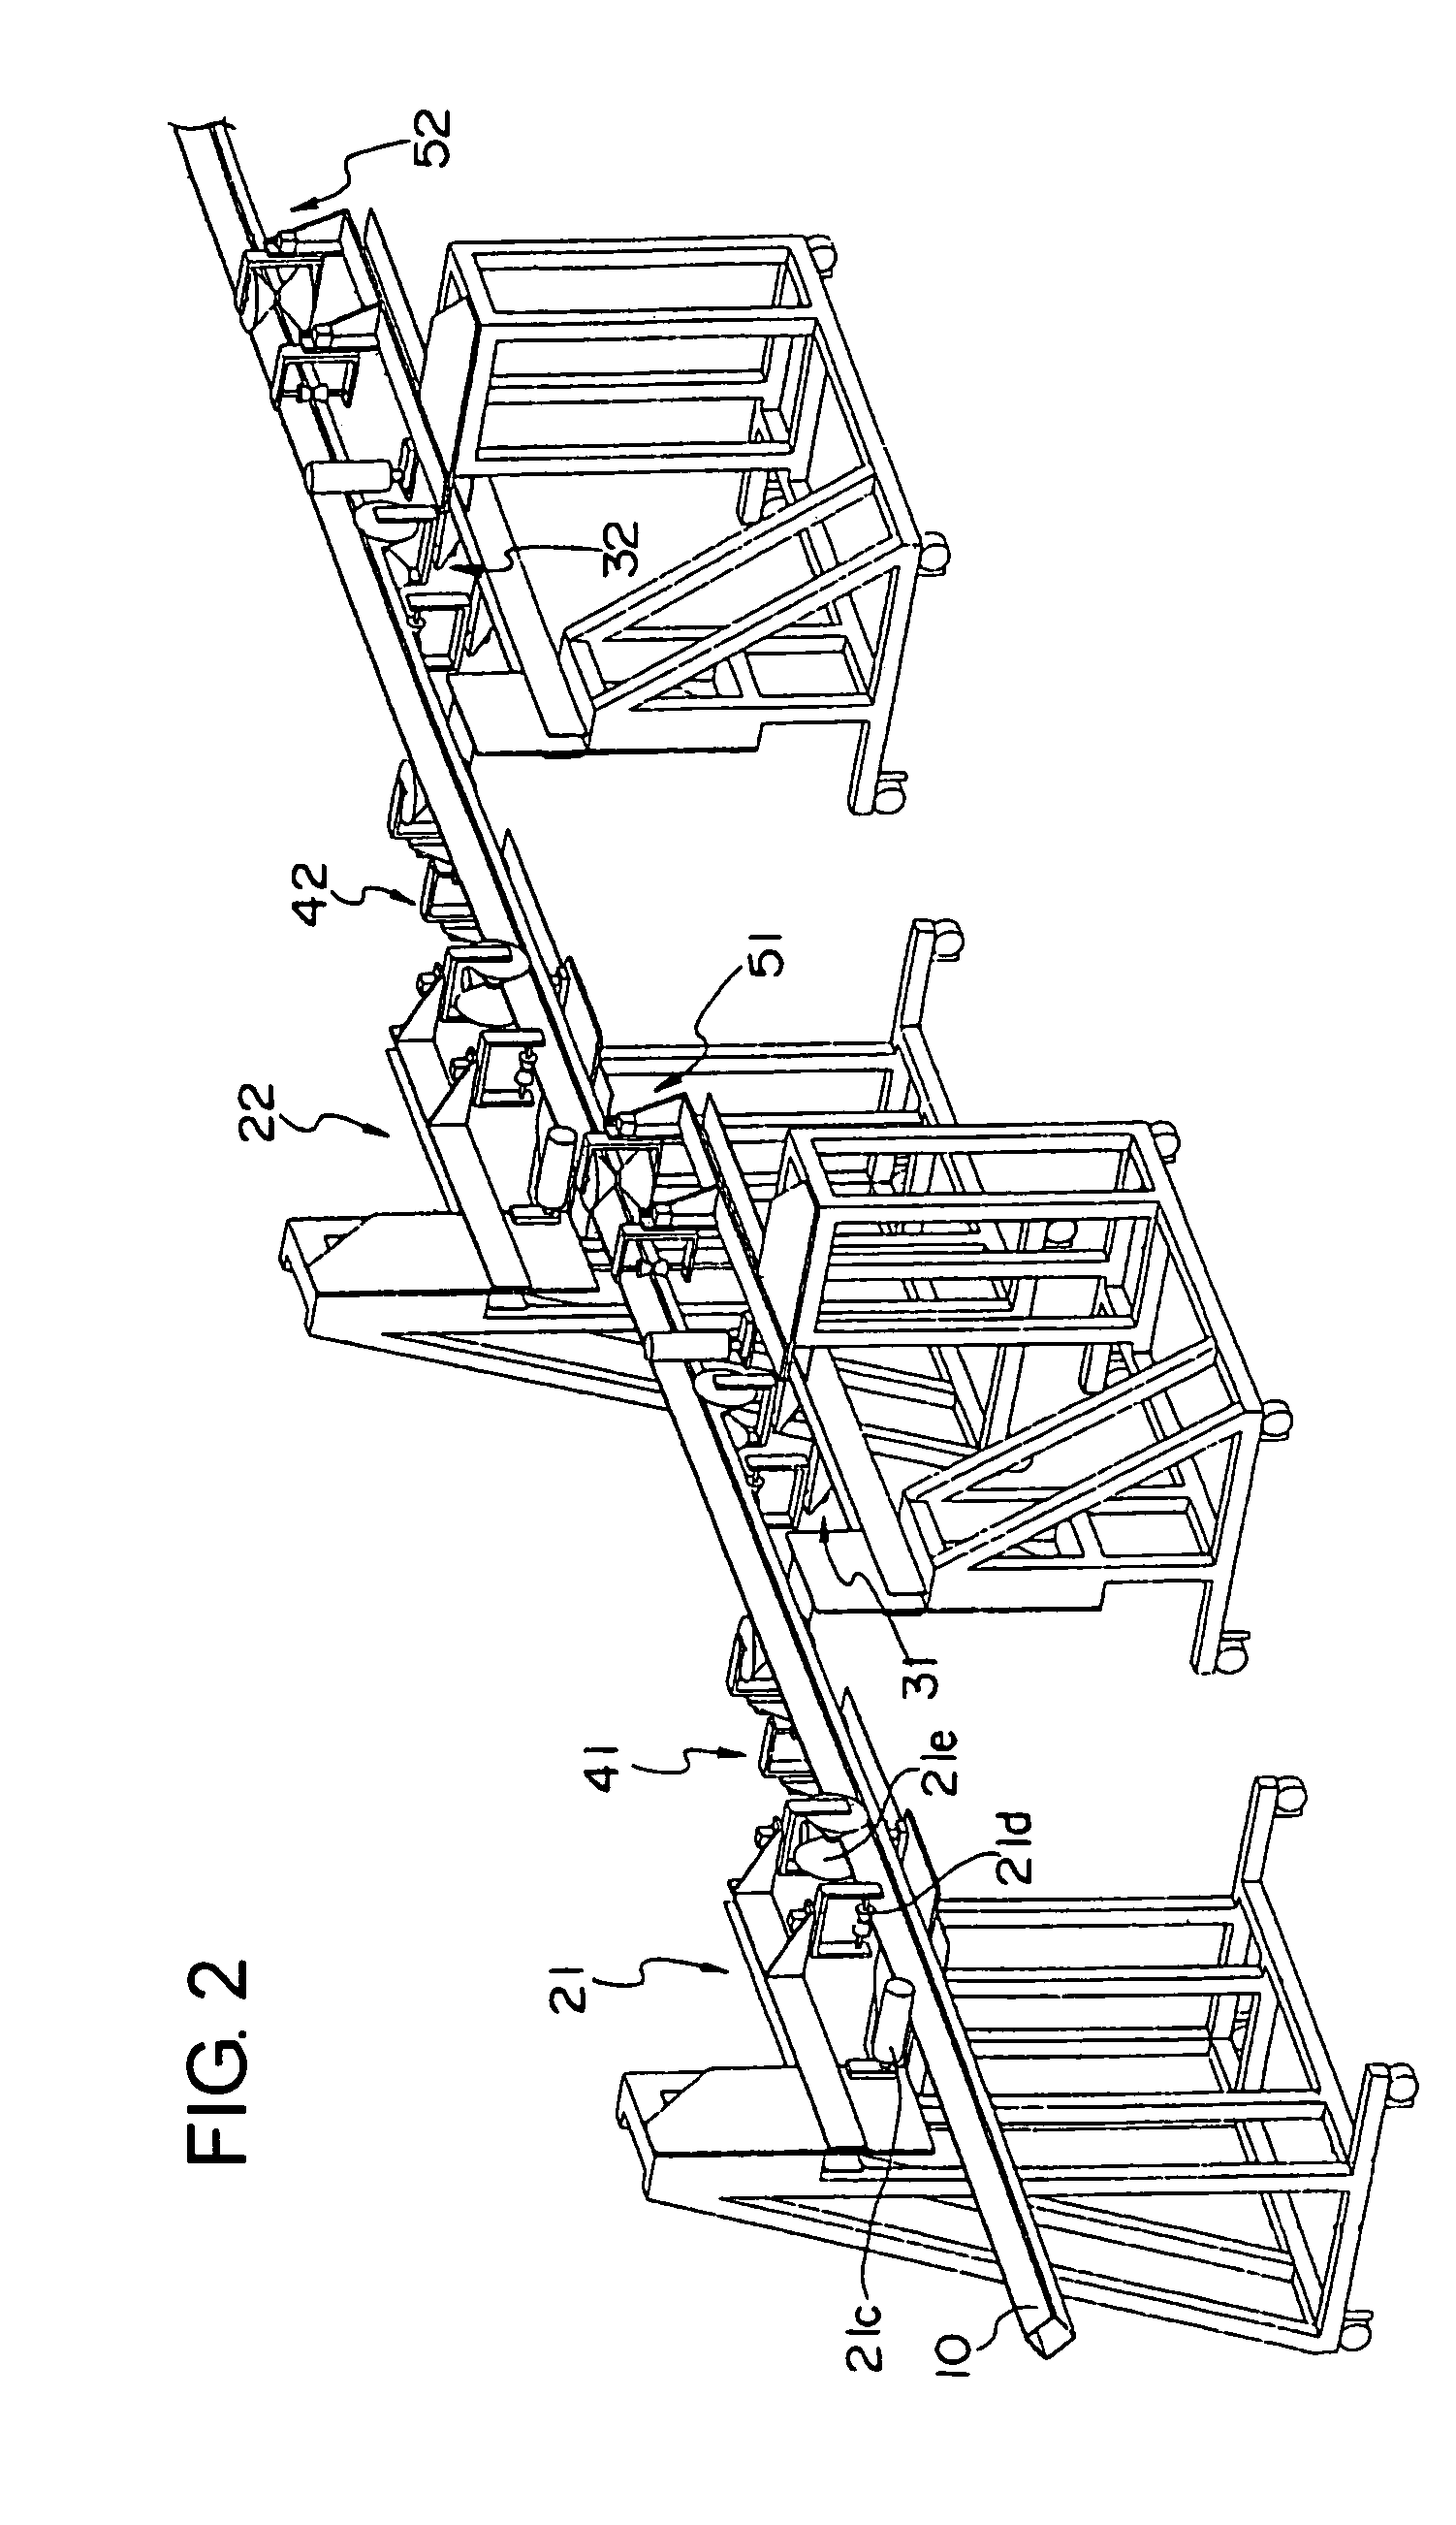 Apparatus for continuously forming FRP square pipe